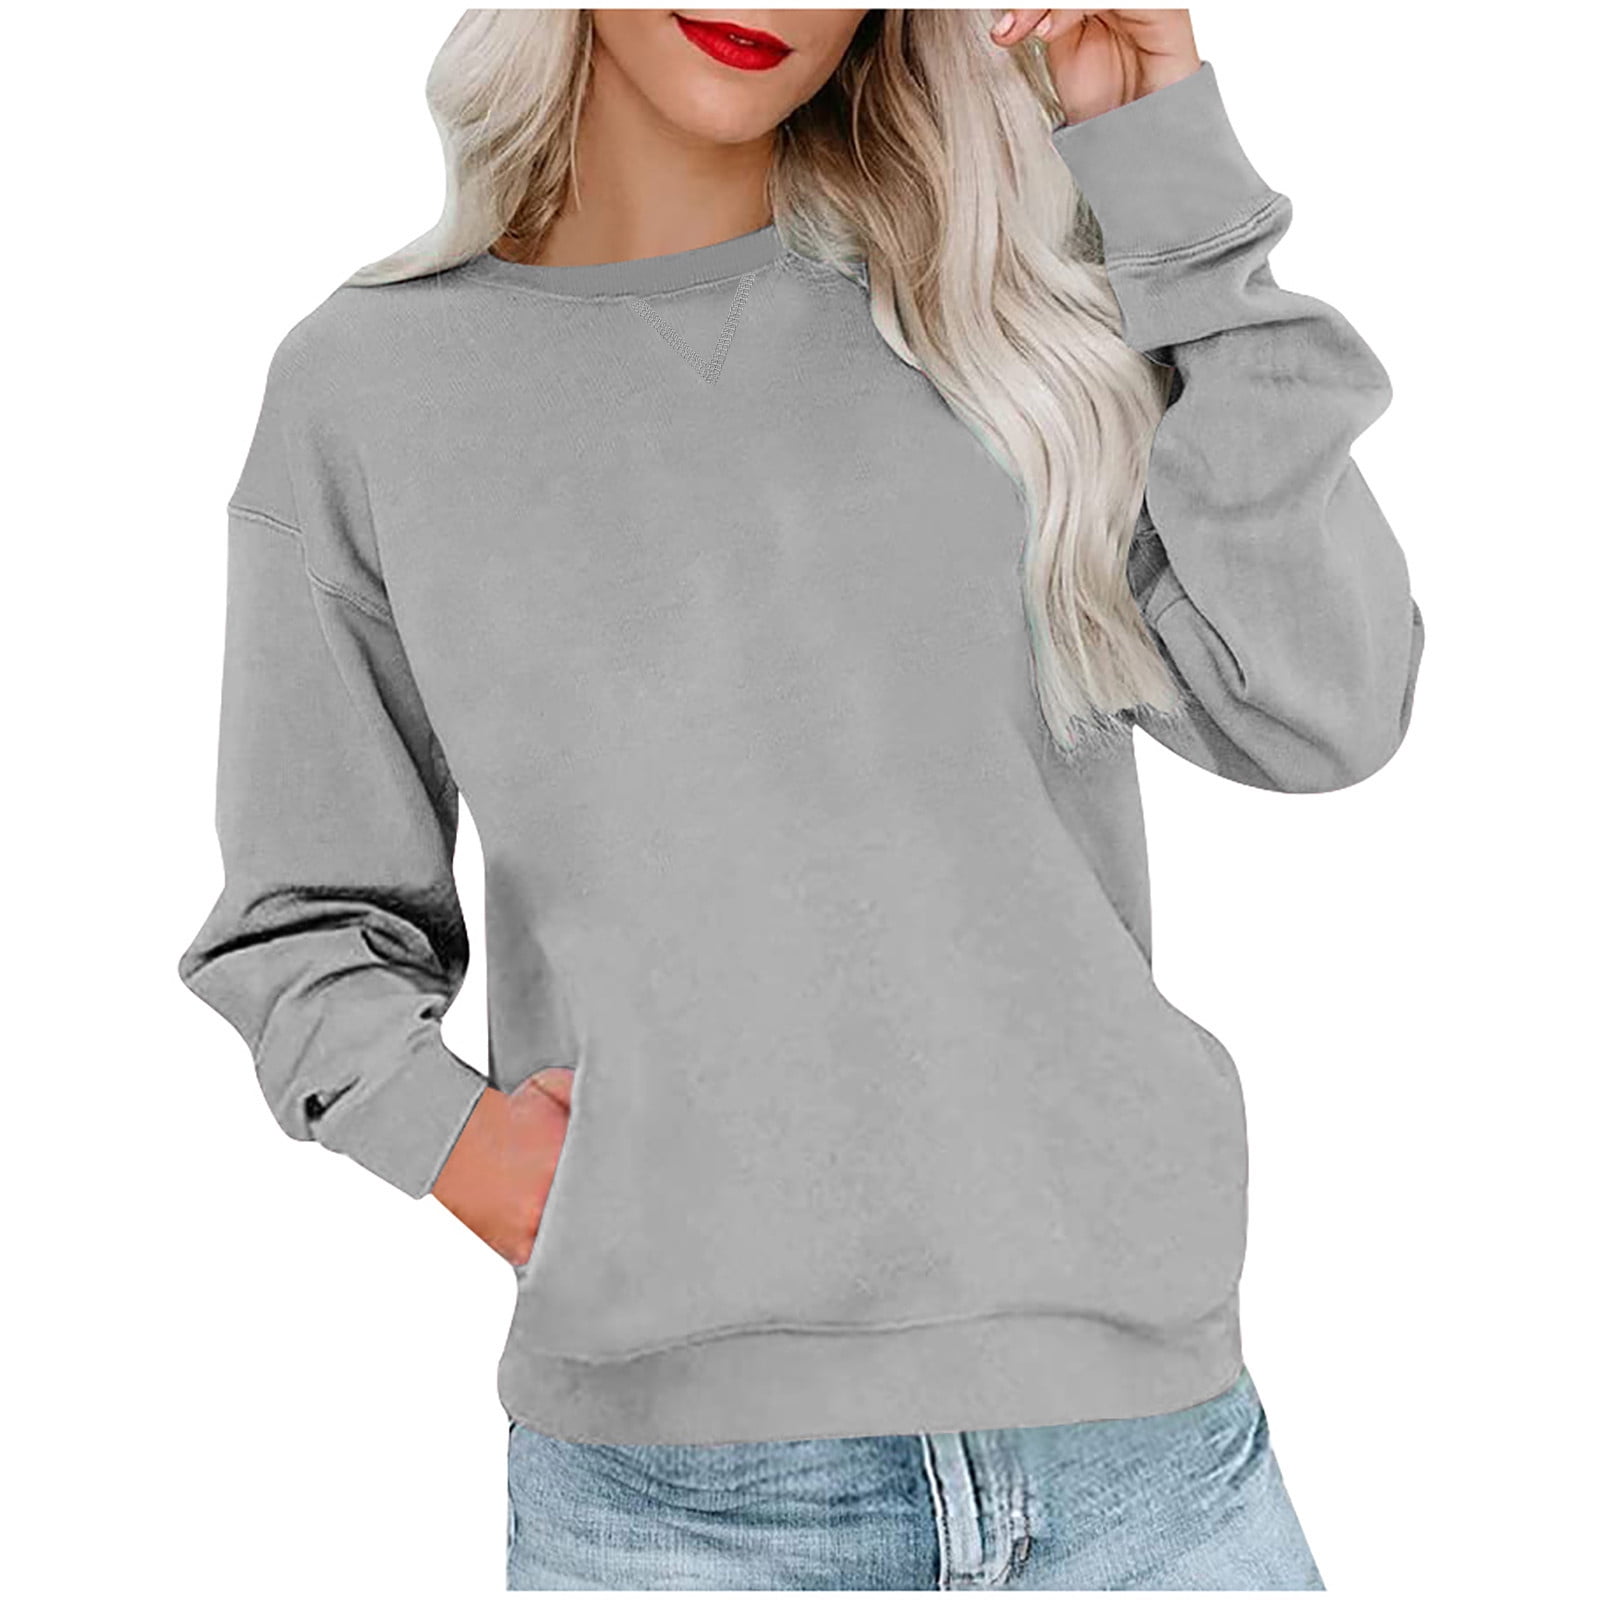 Hfyihgf Women's Casual Long Sleeve Solid Color Tops Crewneck Sweatshirts  Cute Loose Fit Pullovers With Pockets(Gray,XL)